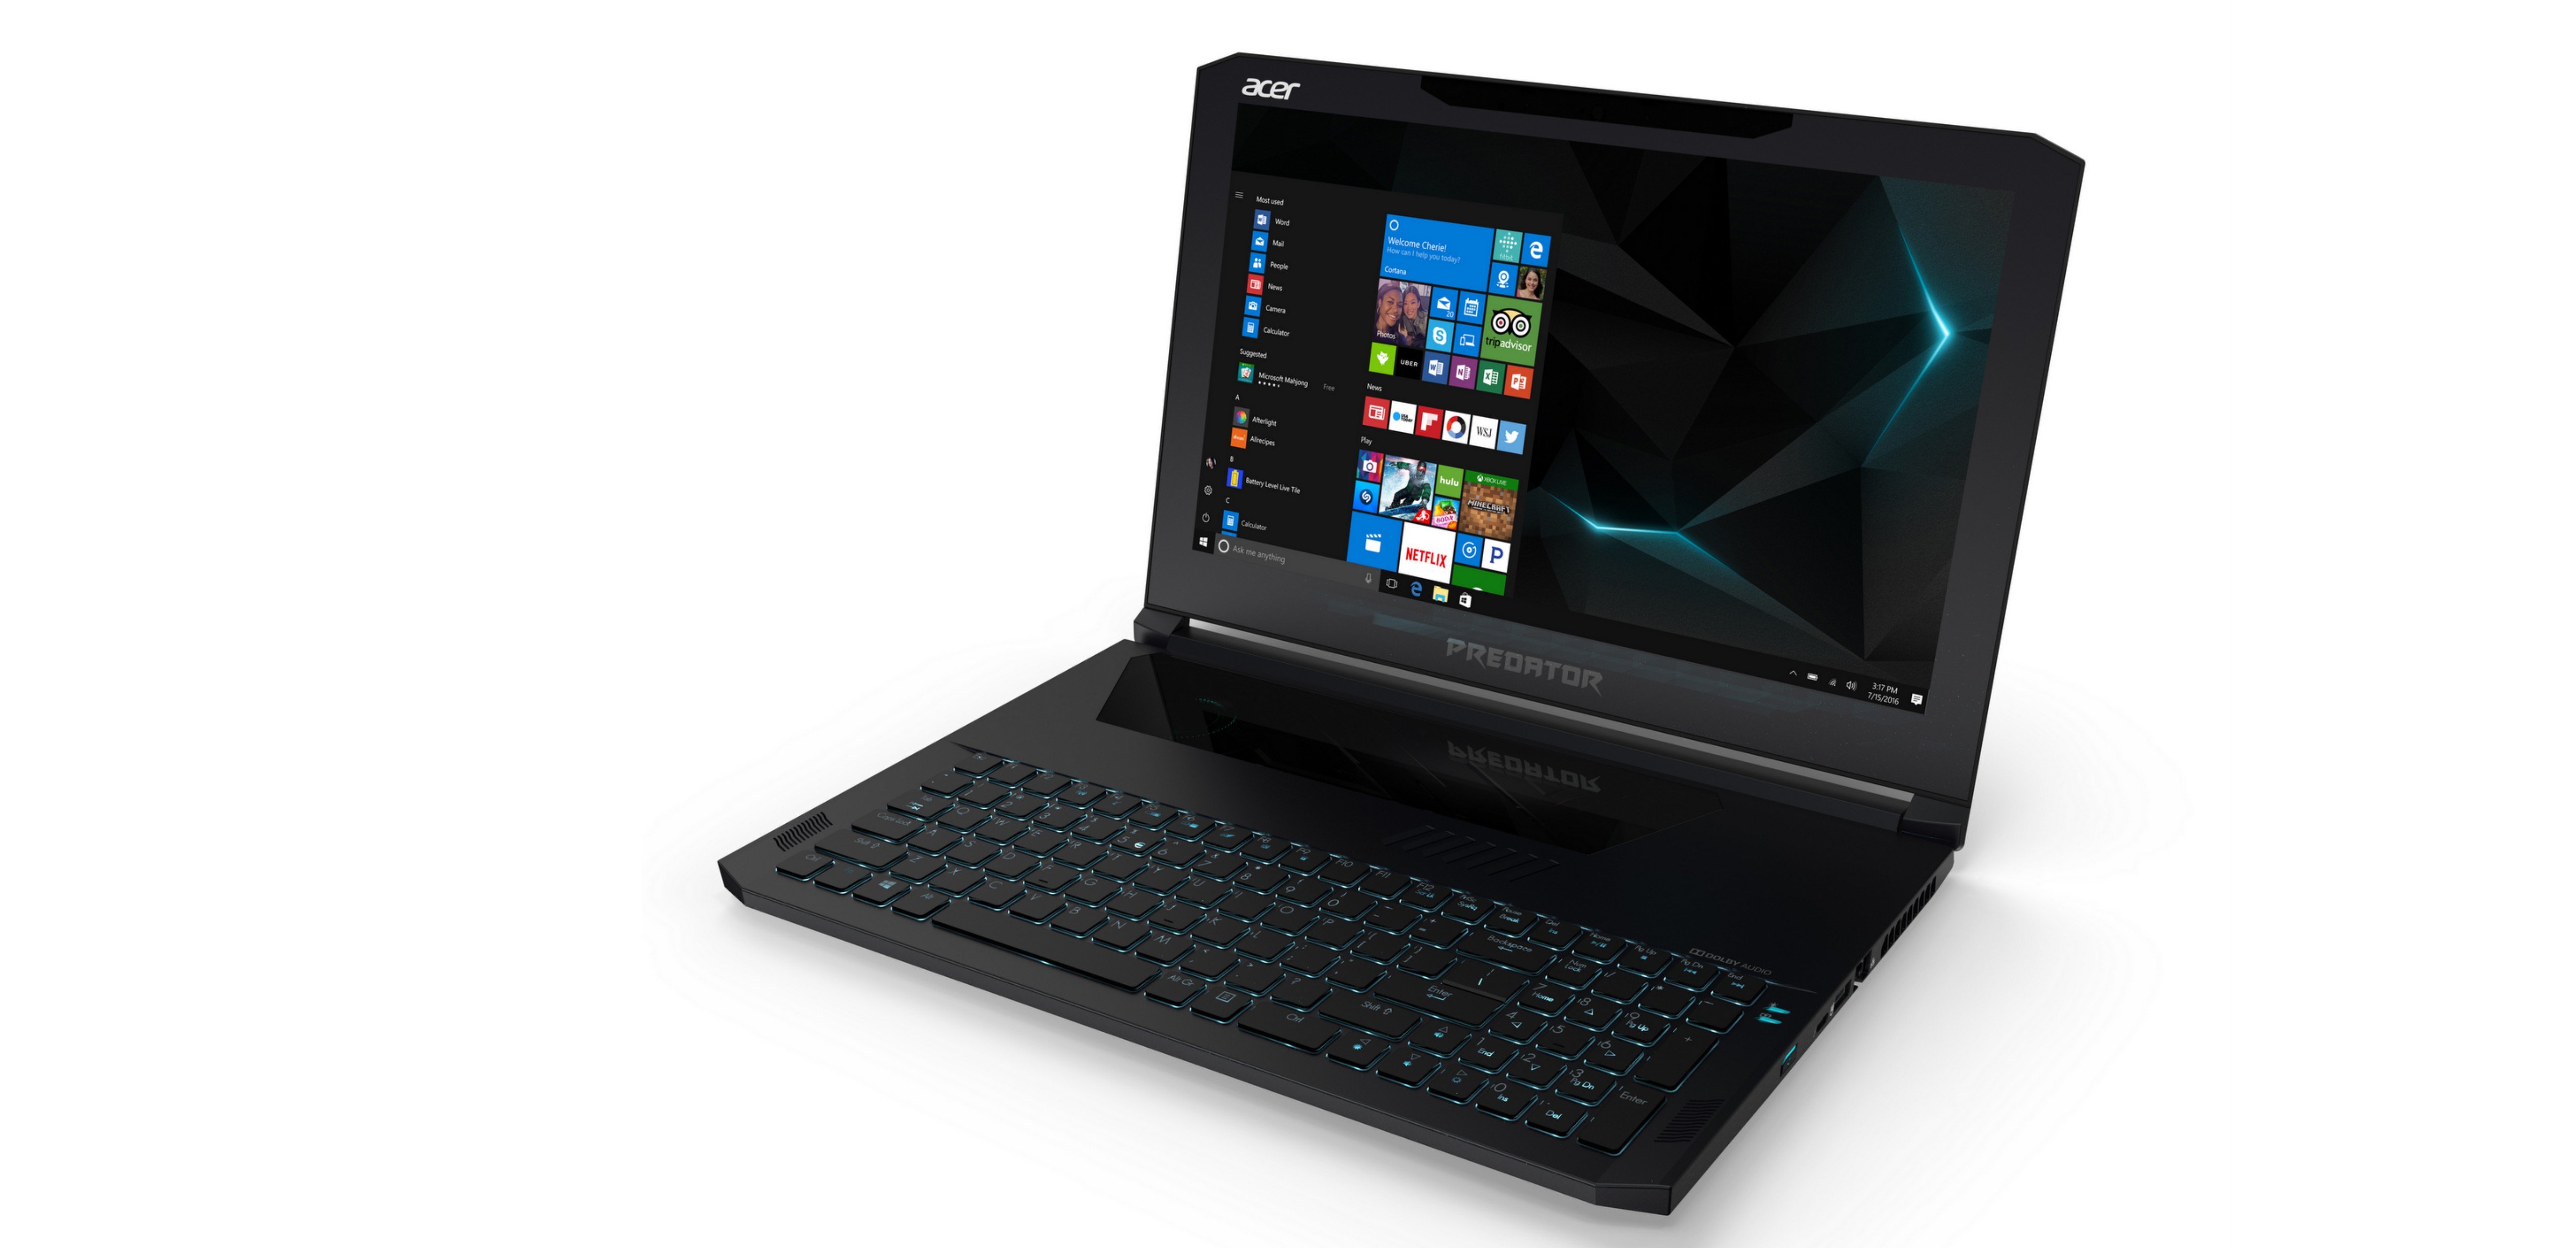 Acer announces powerful new gaming notebooks with Windows 10,